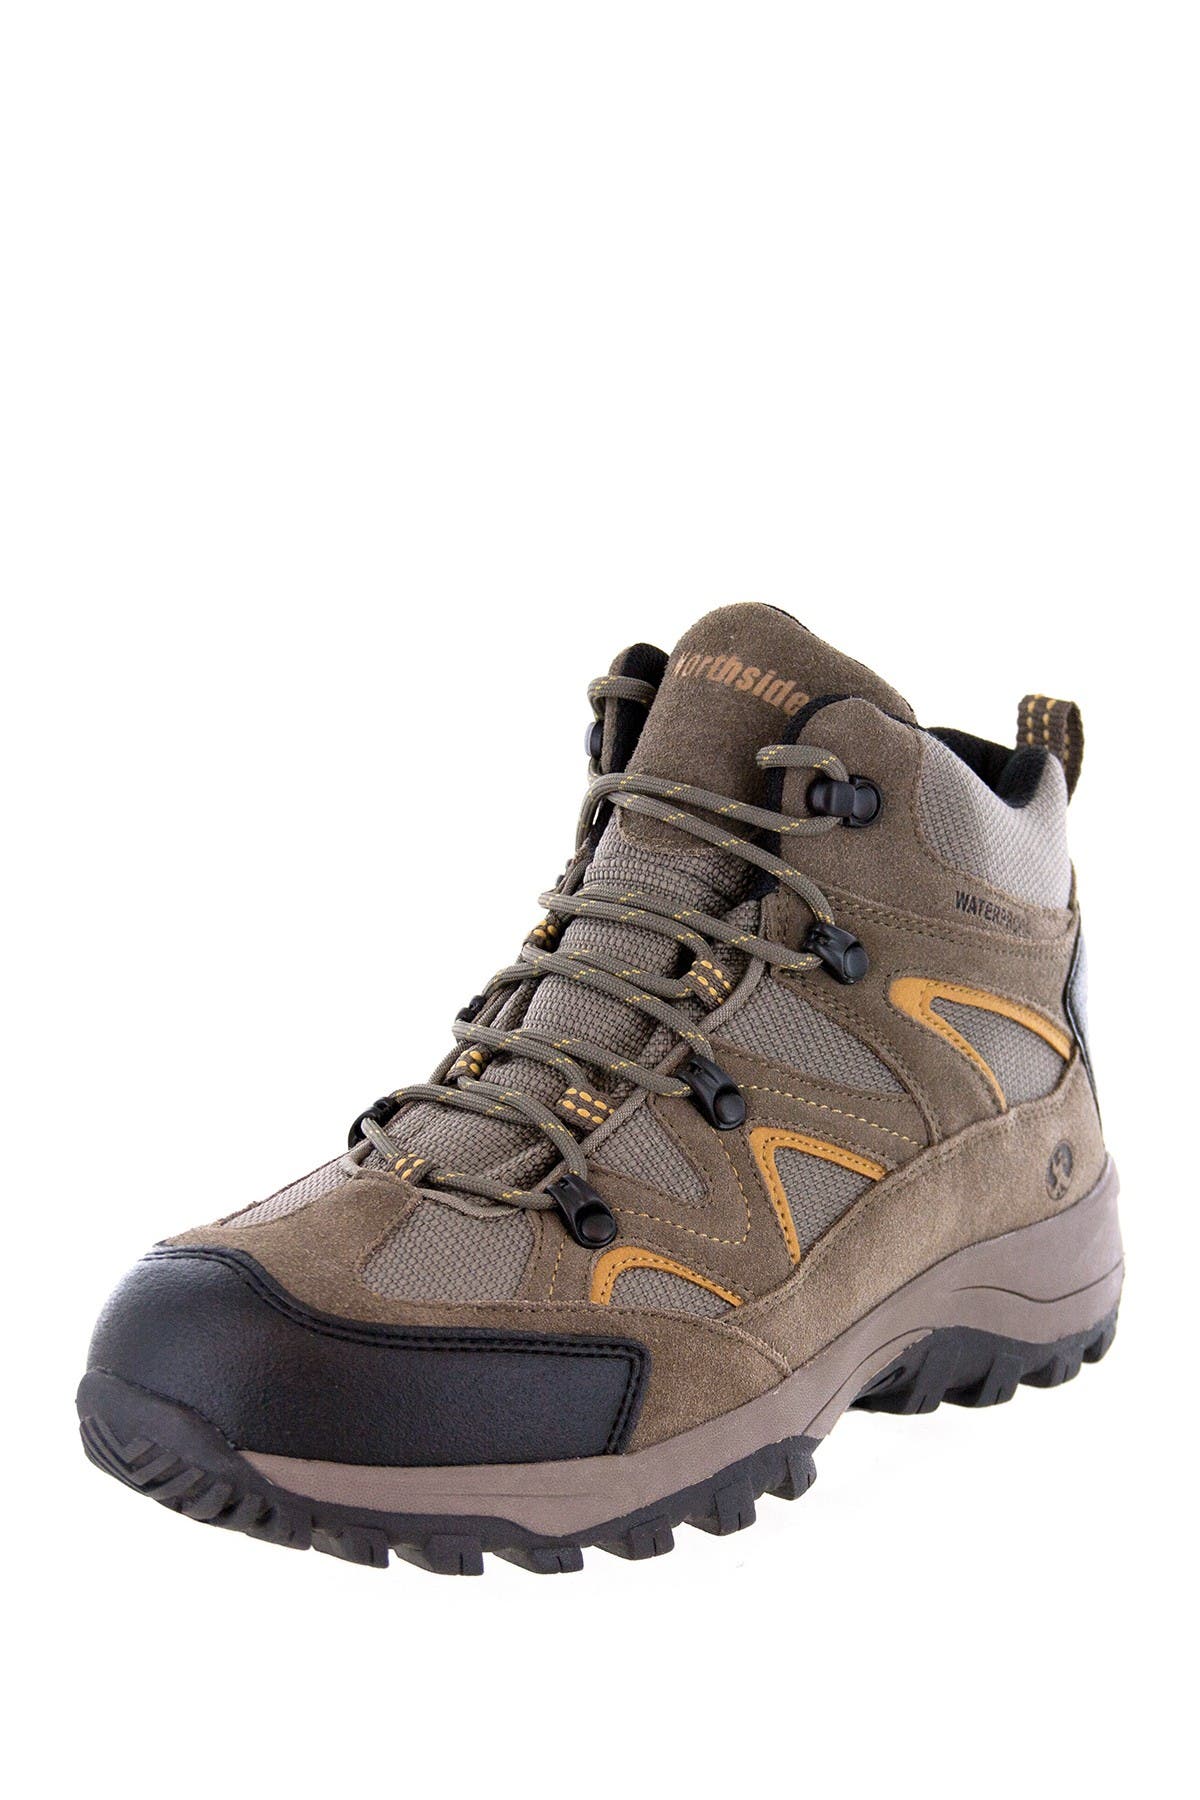 wide width hiking boots